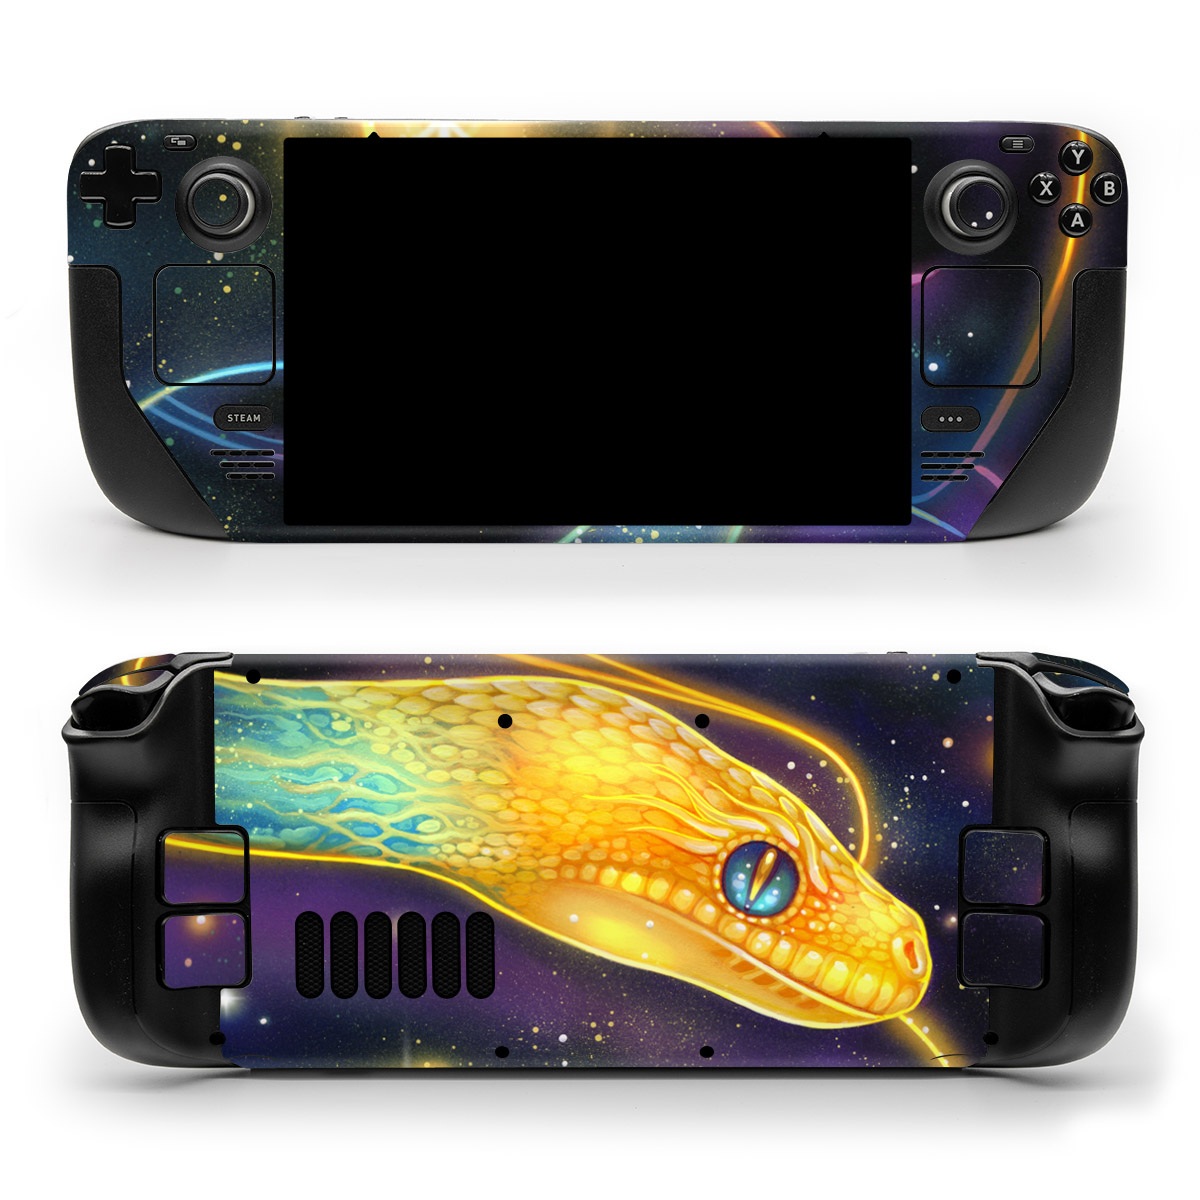 Valve Steam Deck Skin design of Atmosphere, Light, Organism, Art, Font, Astronomical object, Galaxy, Star, Science, Nebula, with black, white, yellow, orange, green, purple colors